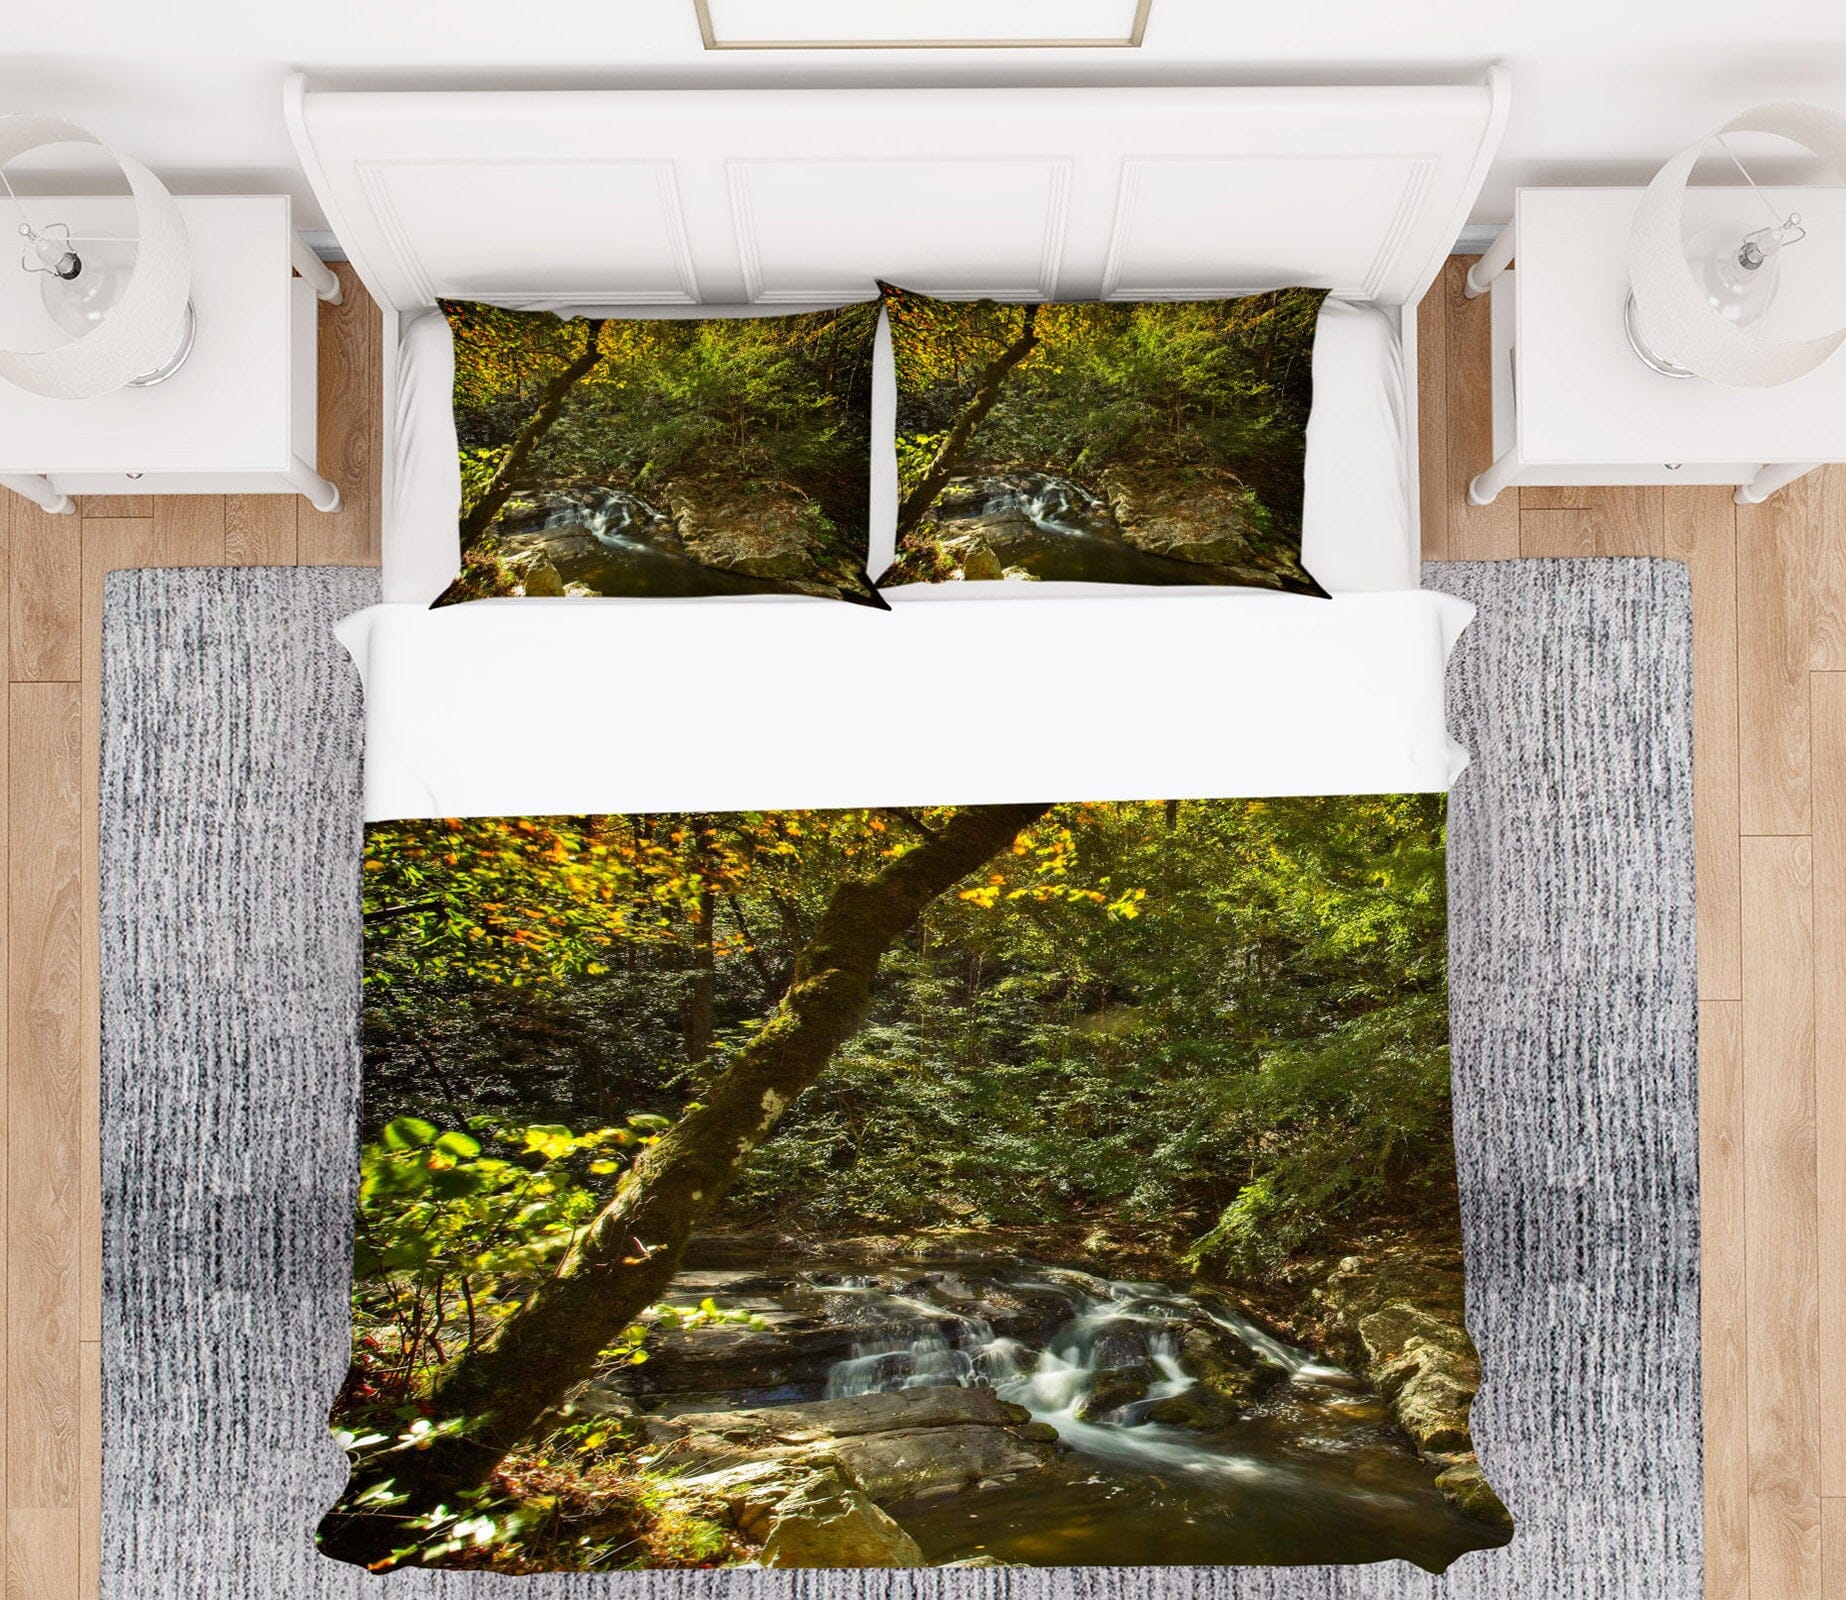 3D Tranquil Creek 2137 Kathy Barefield Bedding Bed Pillowcases Quilt Quiet Covers AJ Creativity Home 